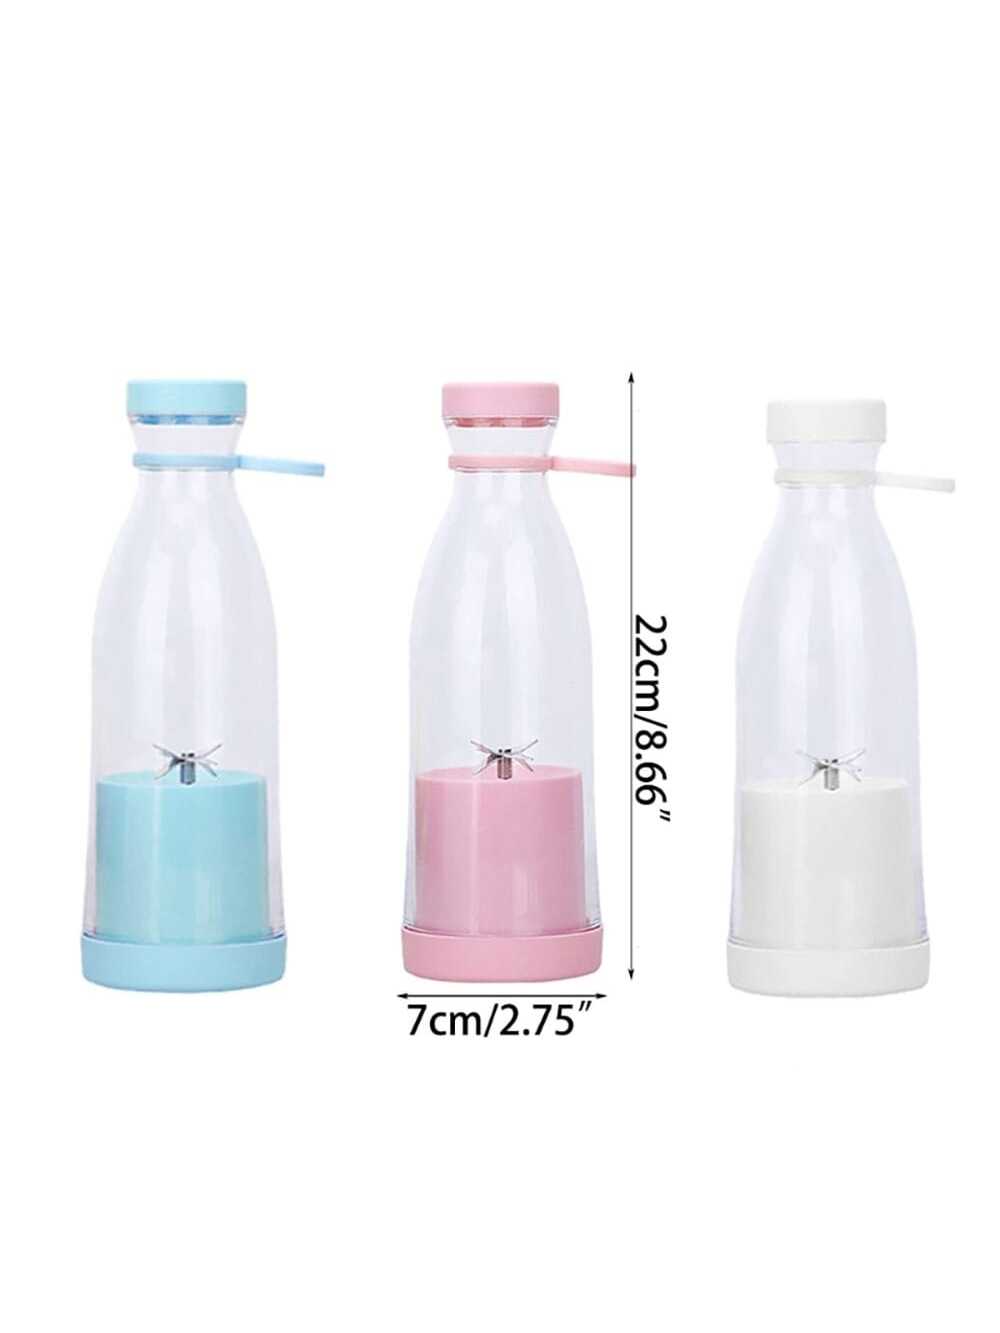 1pc White Portable Rechargeable Electric Juice Cup With 6-blade Wine Bottle Design, Suitable For Home/office Use; Charging, Portable And Silent-White-9